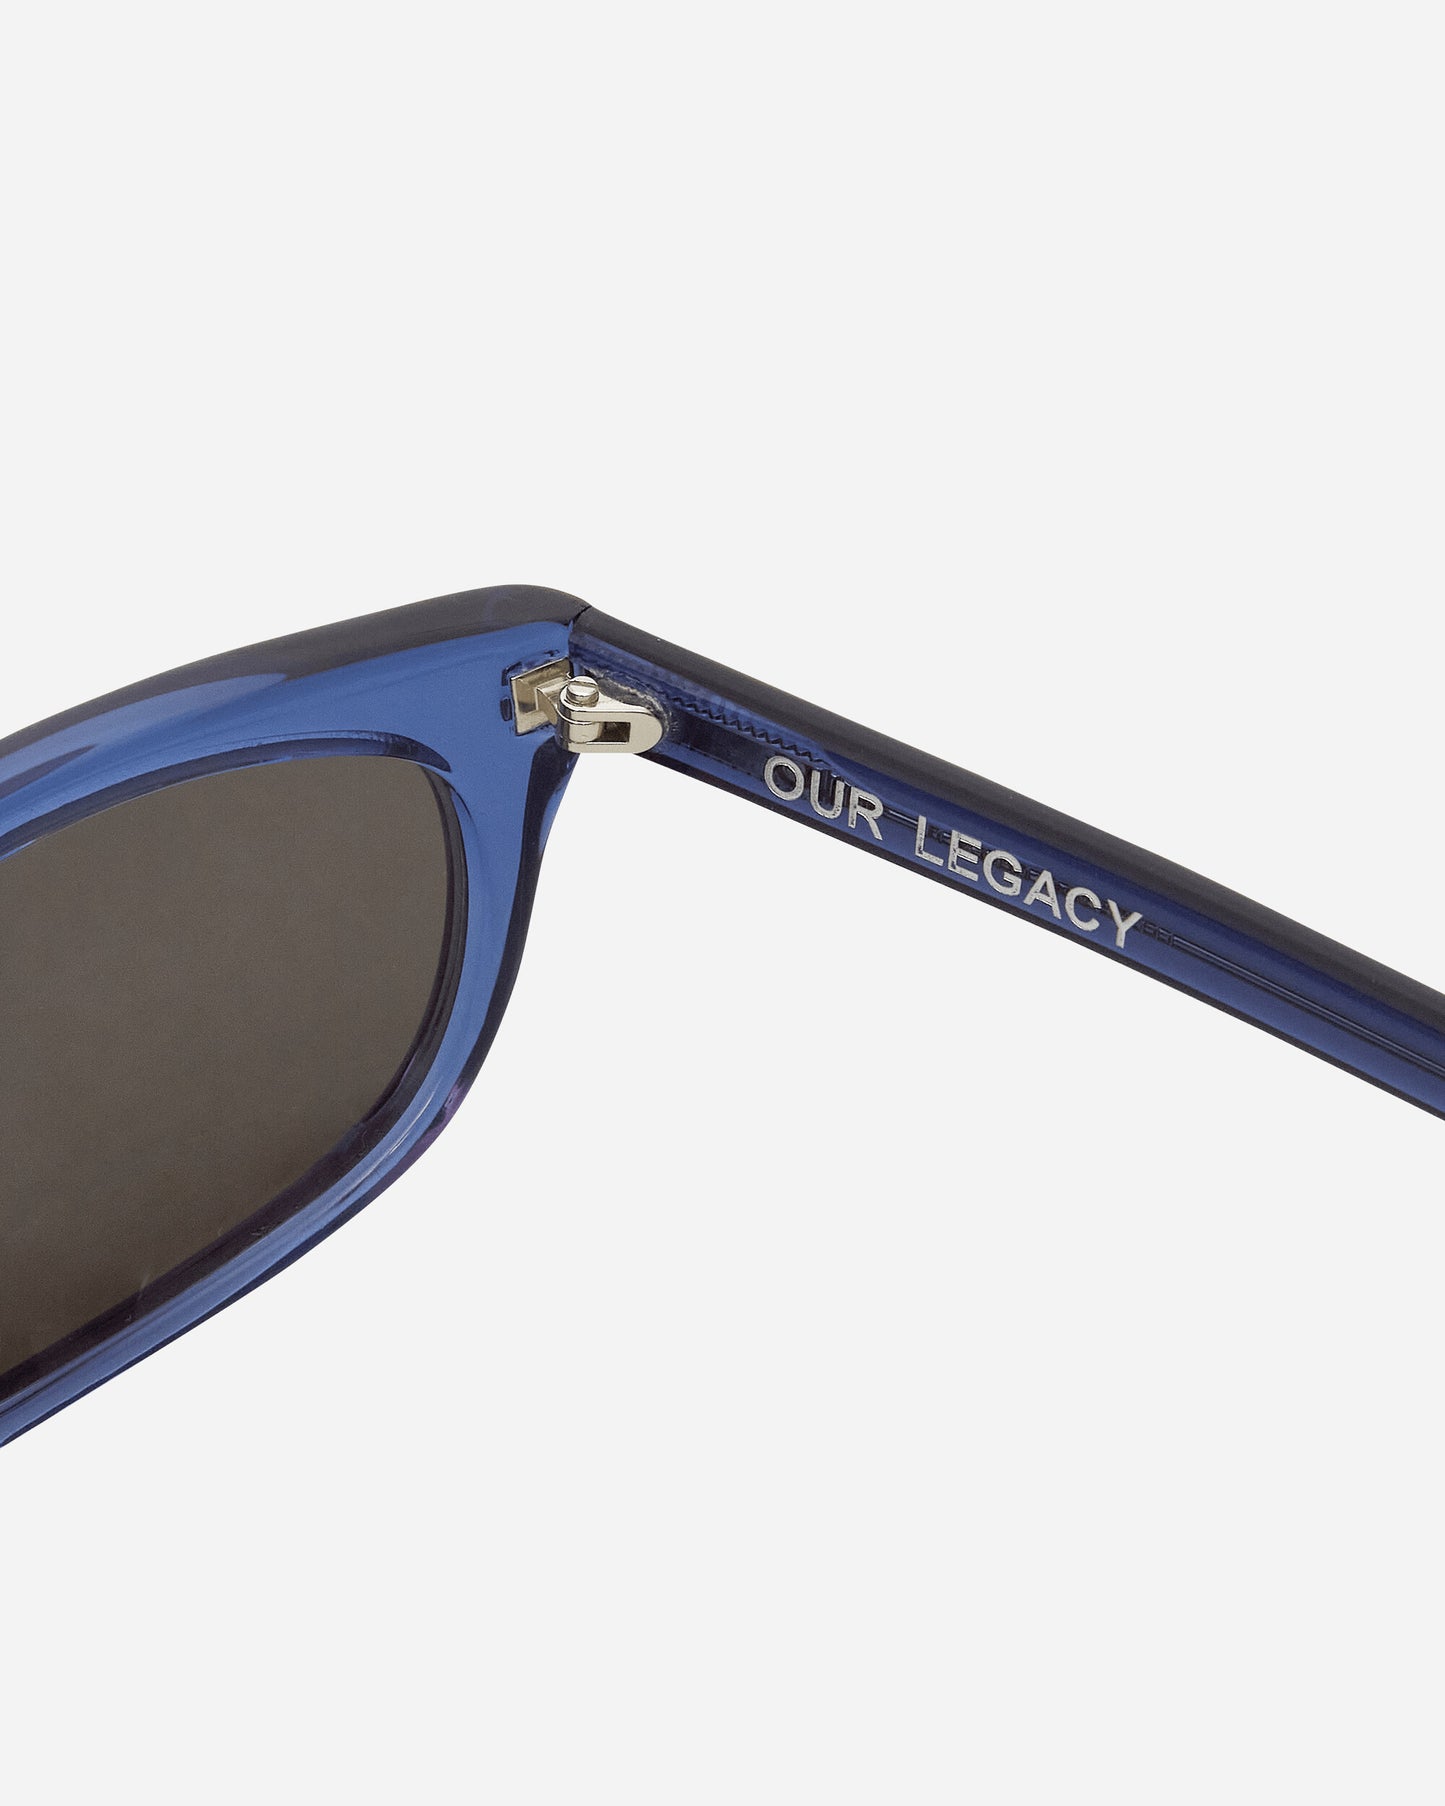 Our Legacy Shelter Blueberry Speedway Eyewear Sunglasses A2248SBS 001